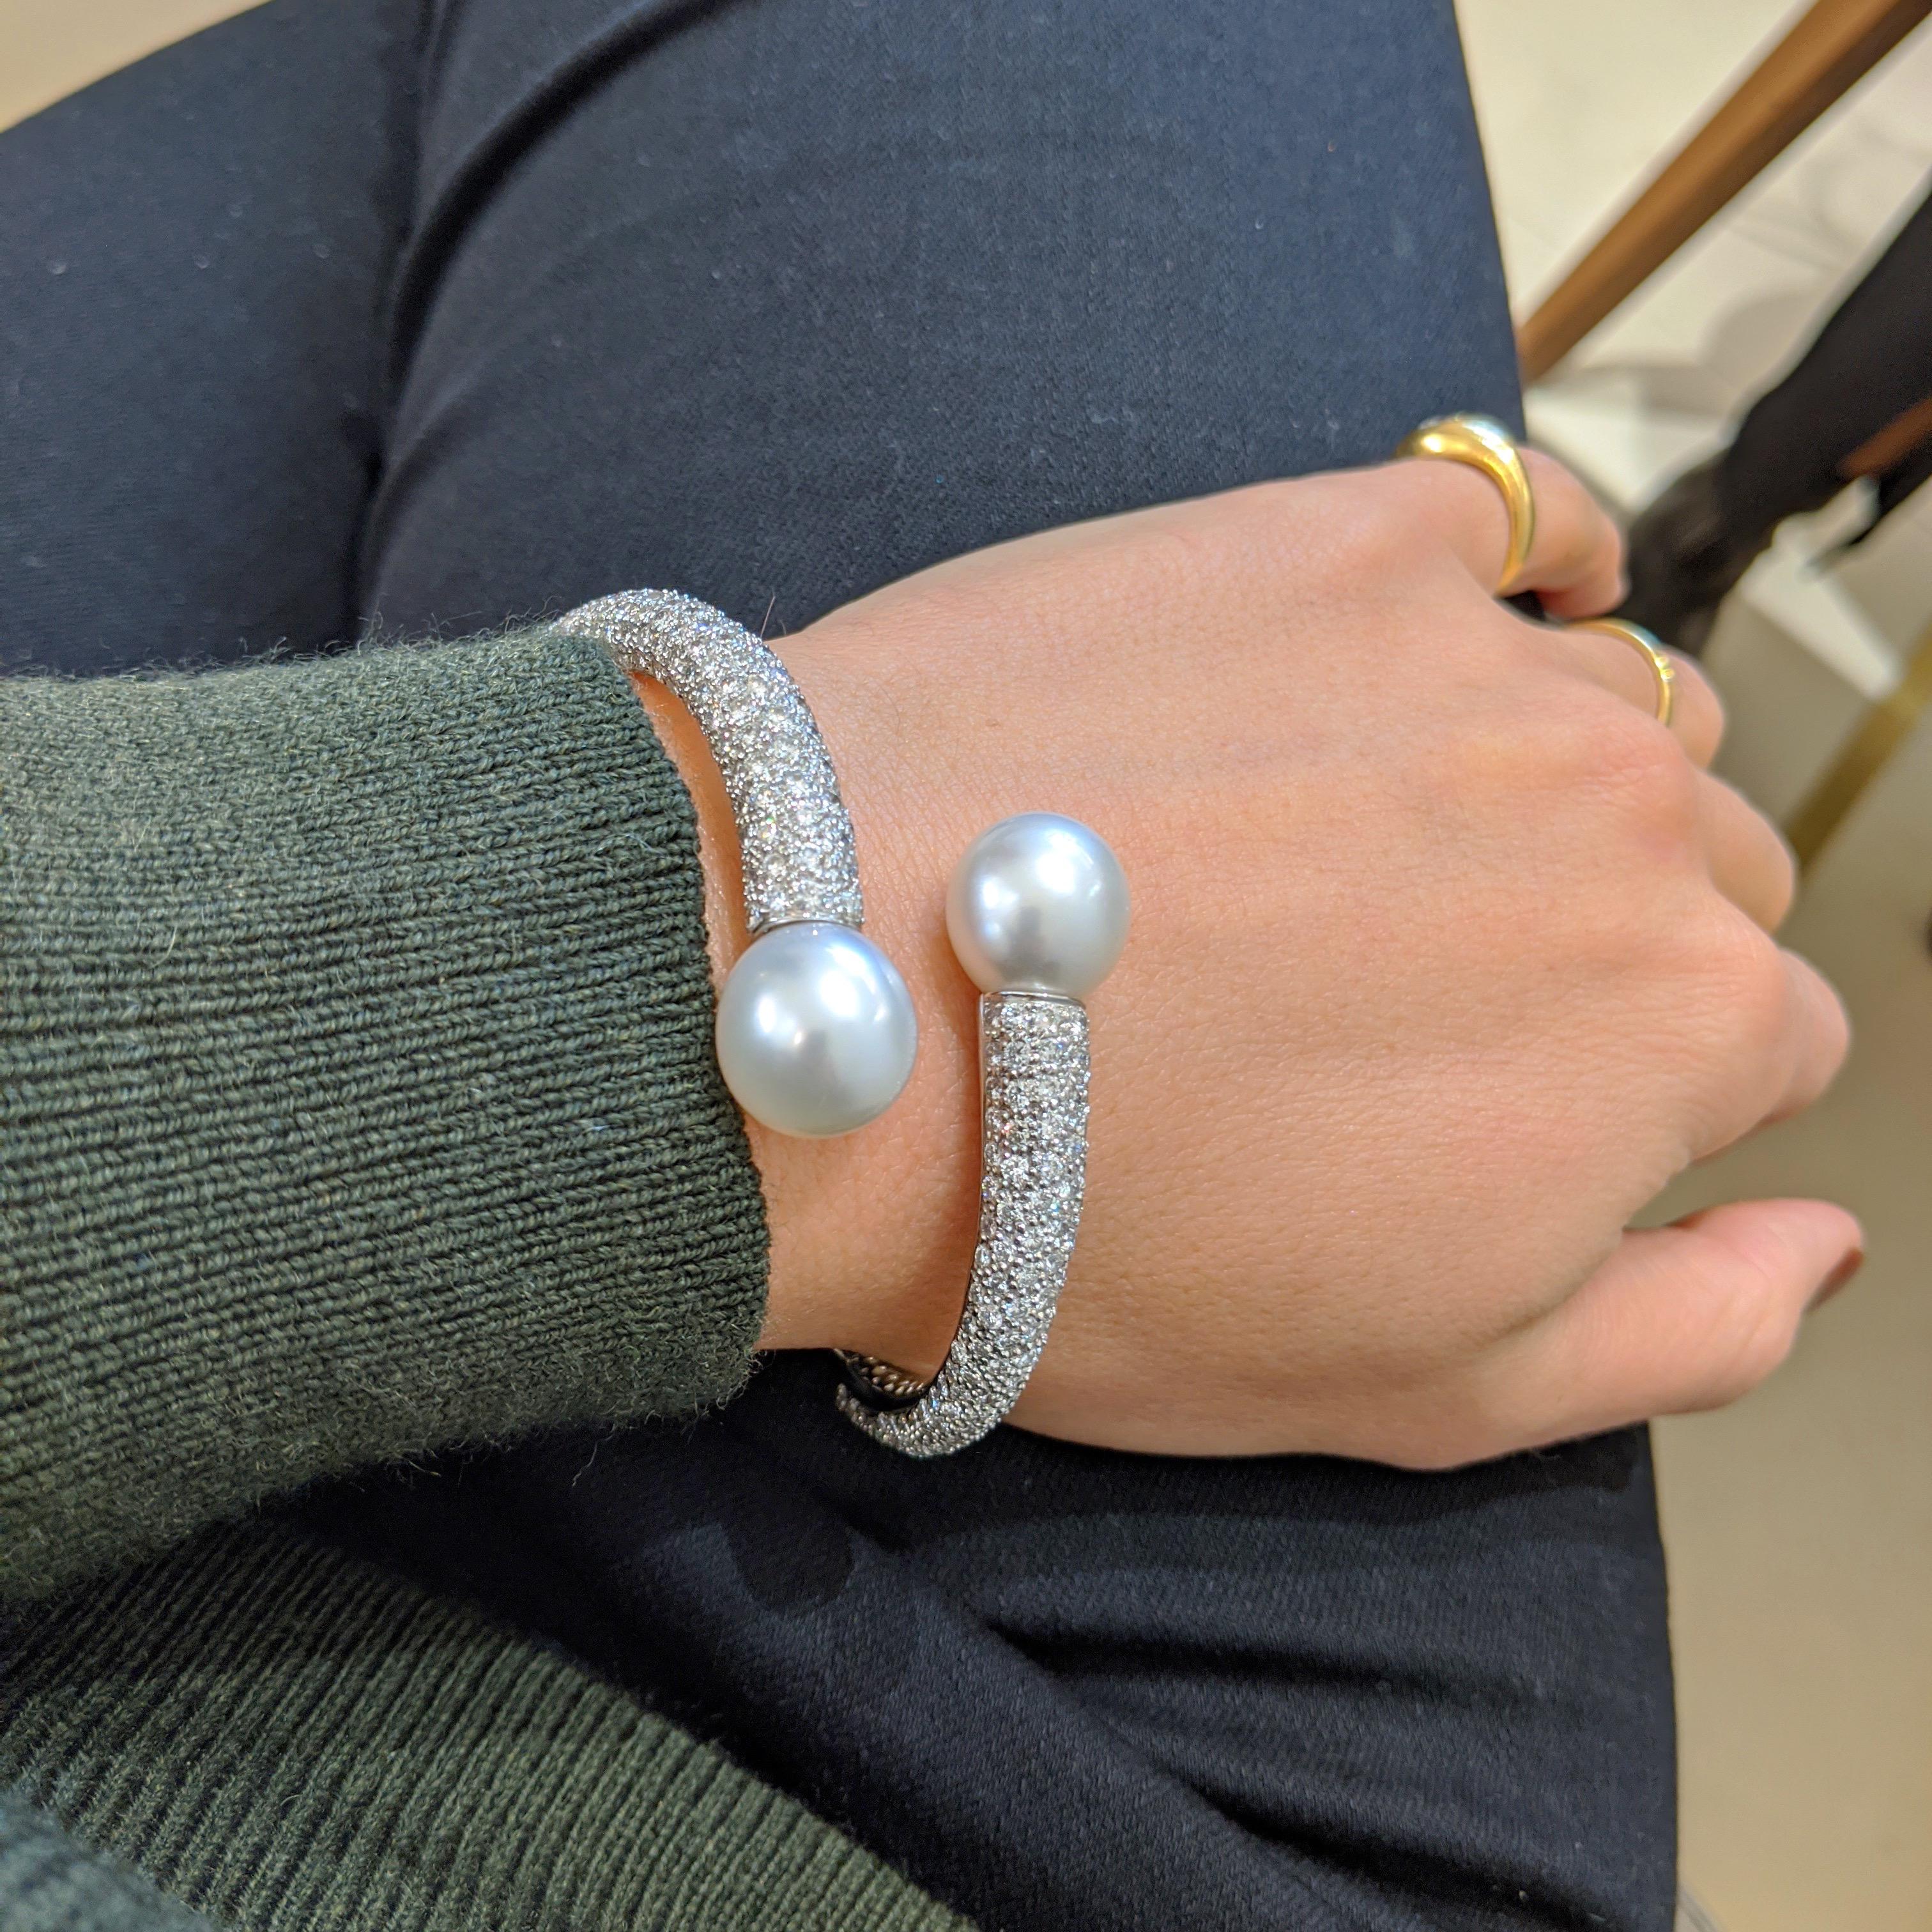 Designed exclusively for Cellini this modern crossover bracelet features 2 matching 13mm white south sea pearls set on pave diamond open bangle bracelet .  The round brilliant diamonds are set 3/4  down. The platinum bracelet is hinged at the bottom